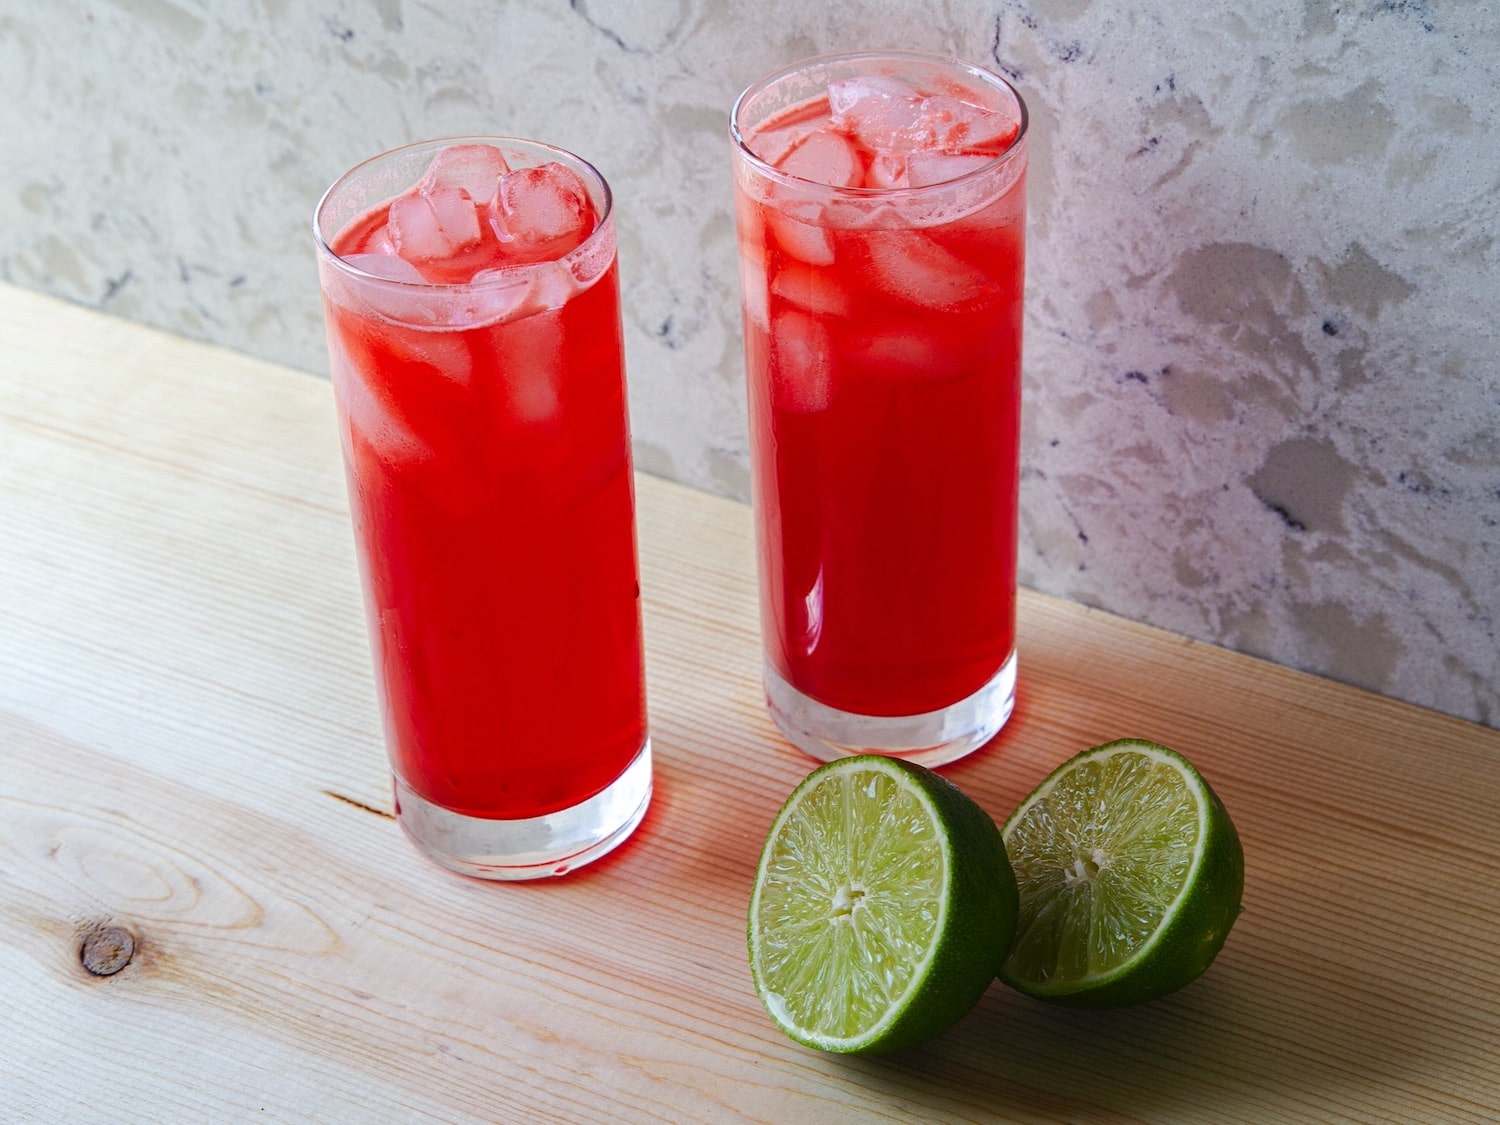 Horizontal angled shot of two red cocktails in tall glasses filled with ice. A sliced lime sits next to the glass on the right.